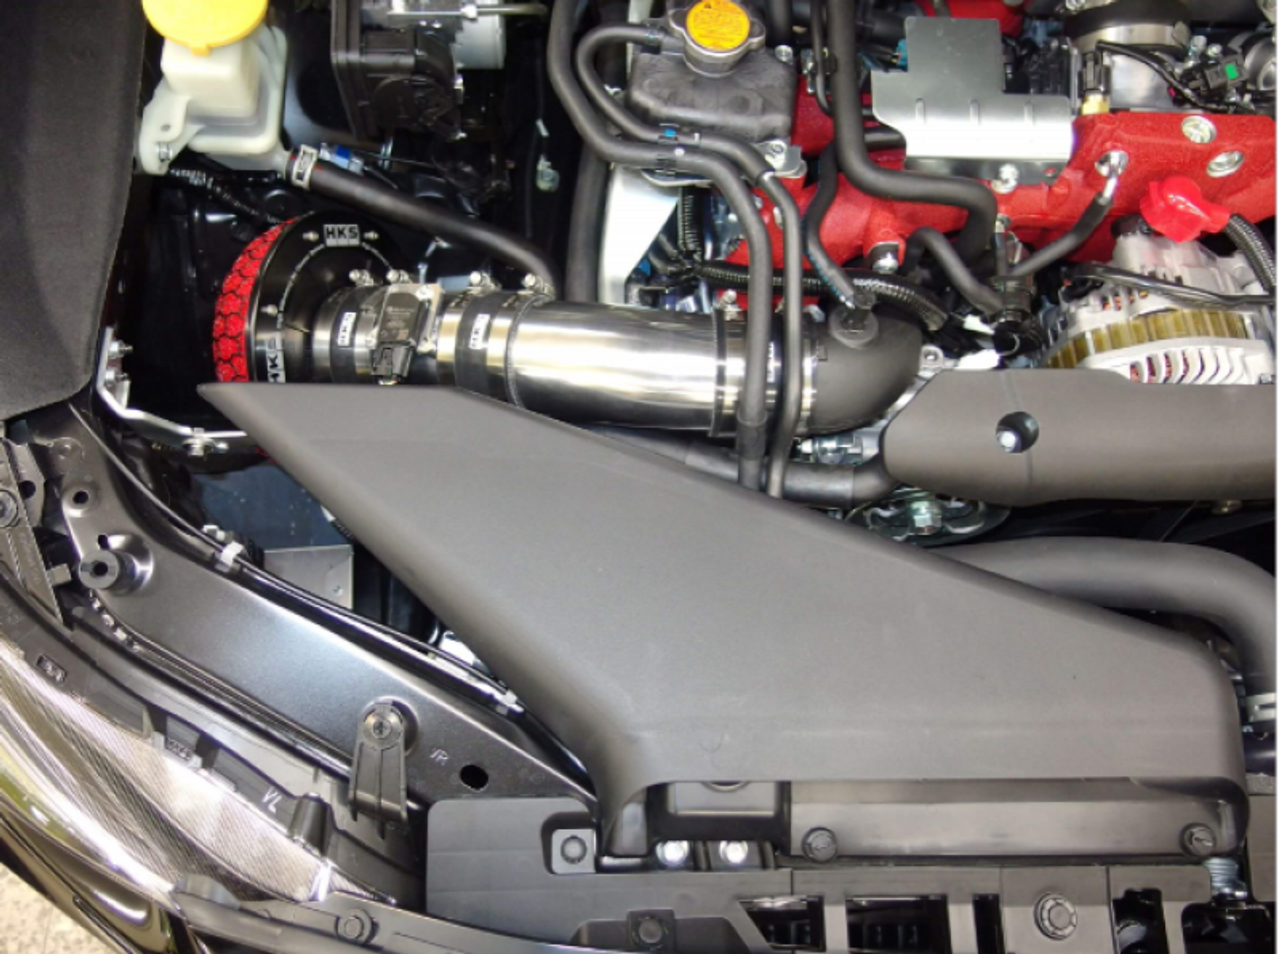 HKS Racing Suction Intake System - Installed